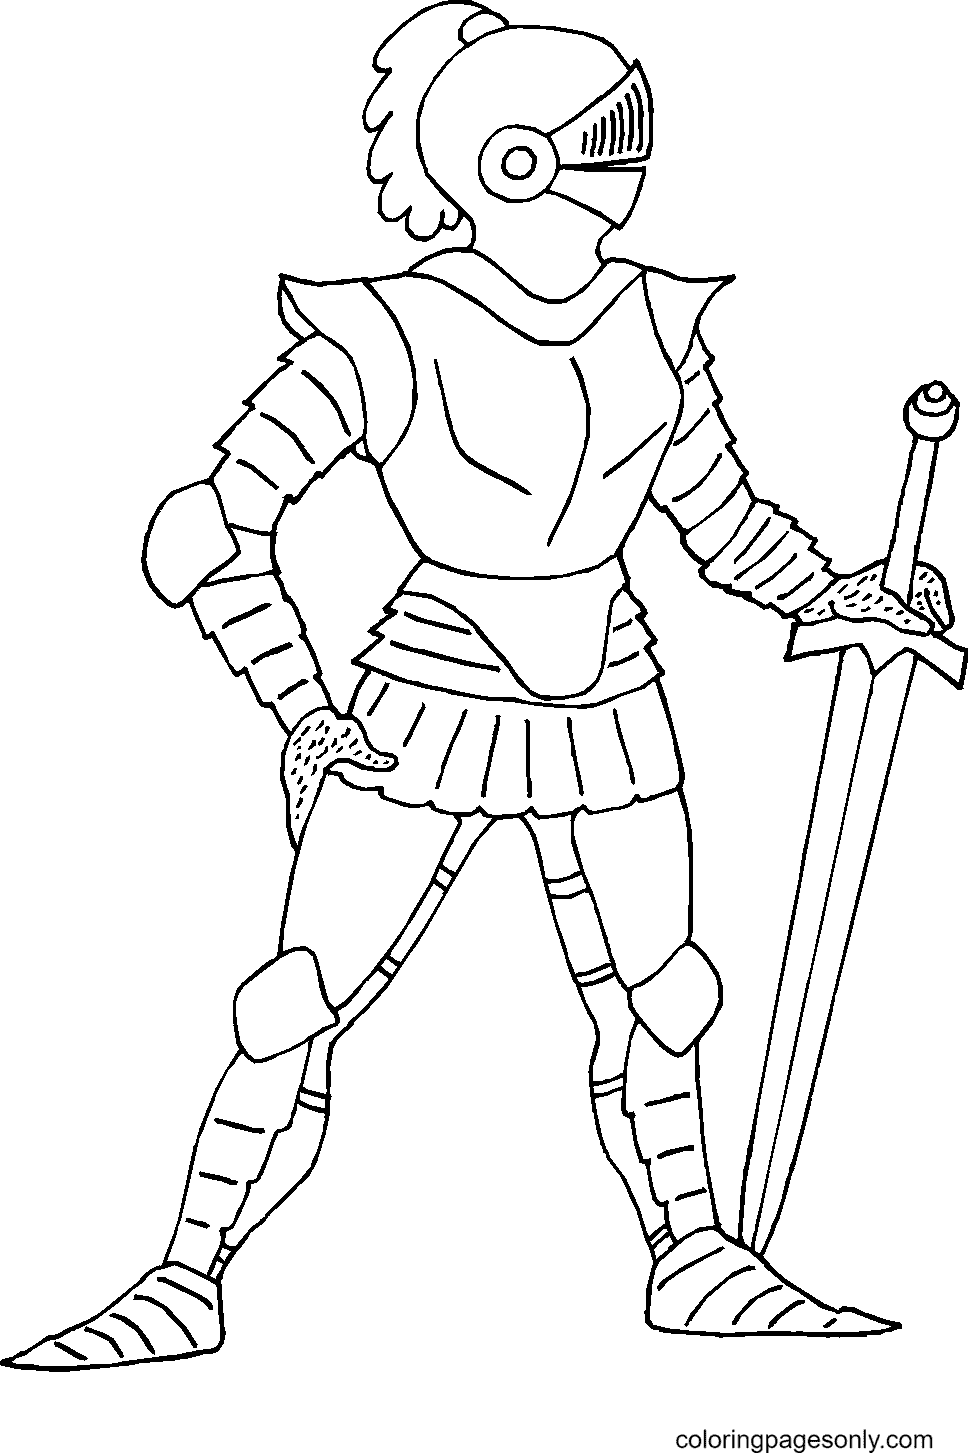 Knight with Sword Coloring Page